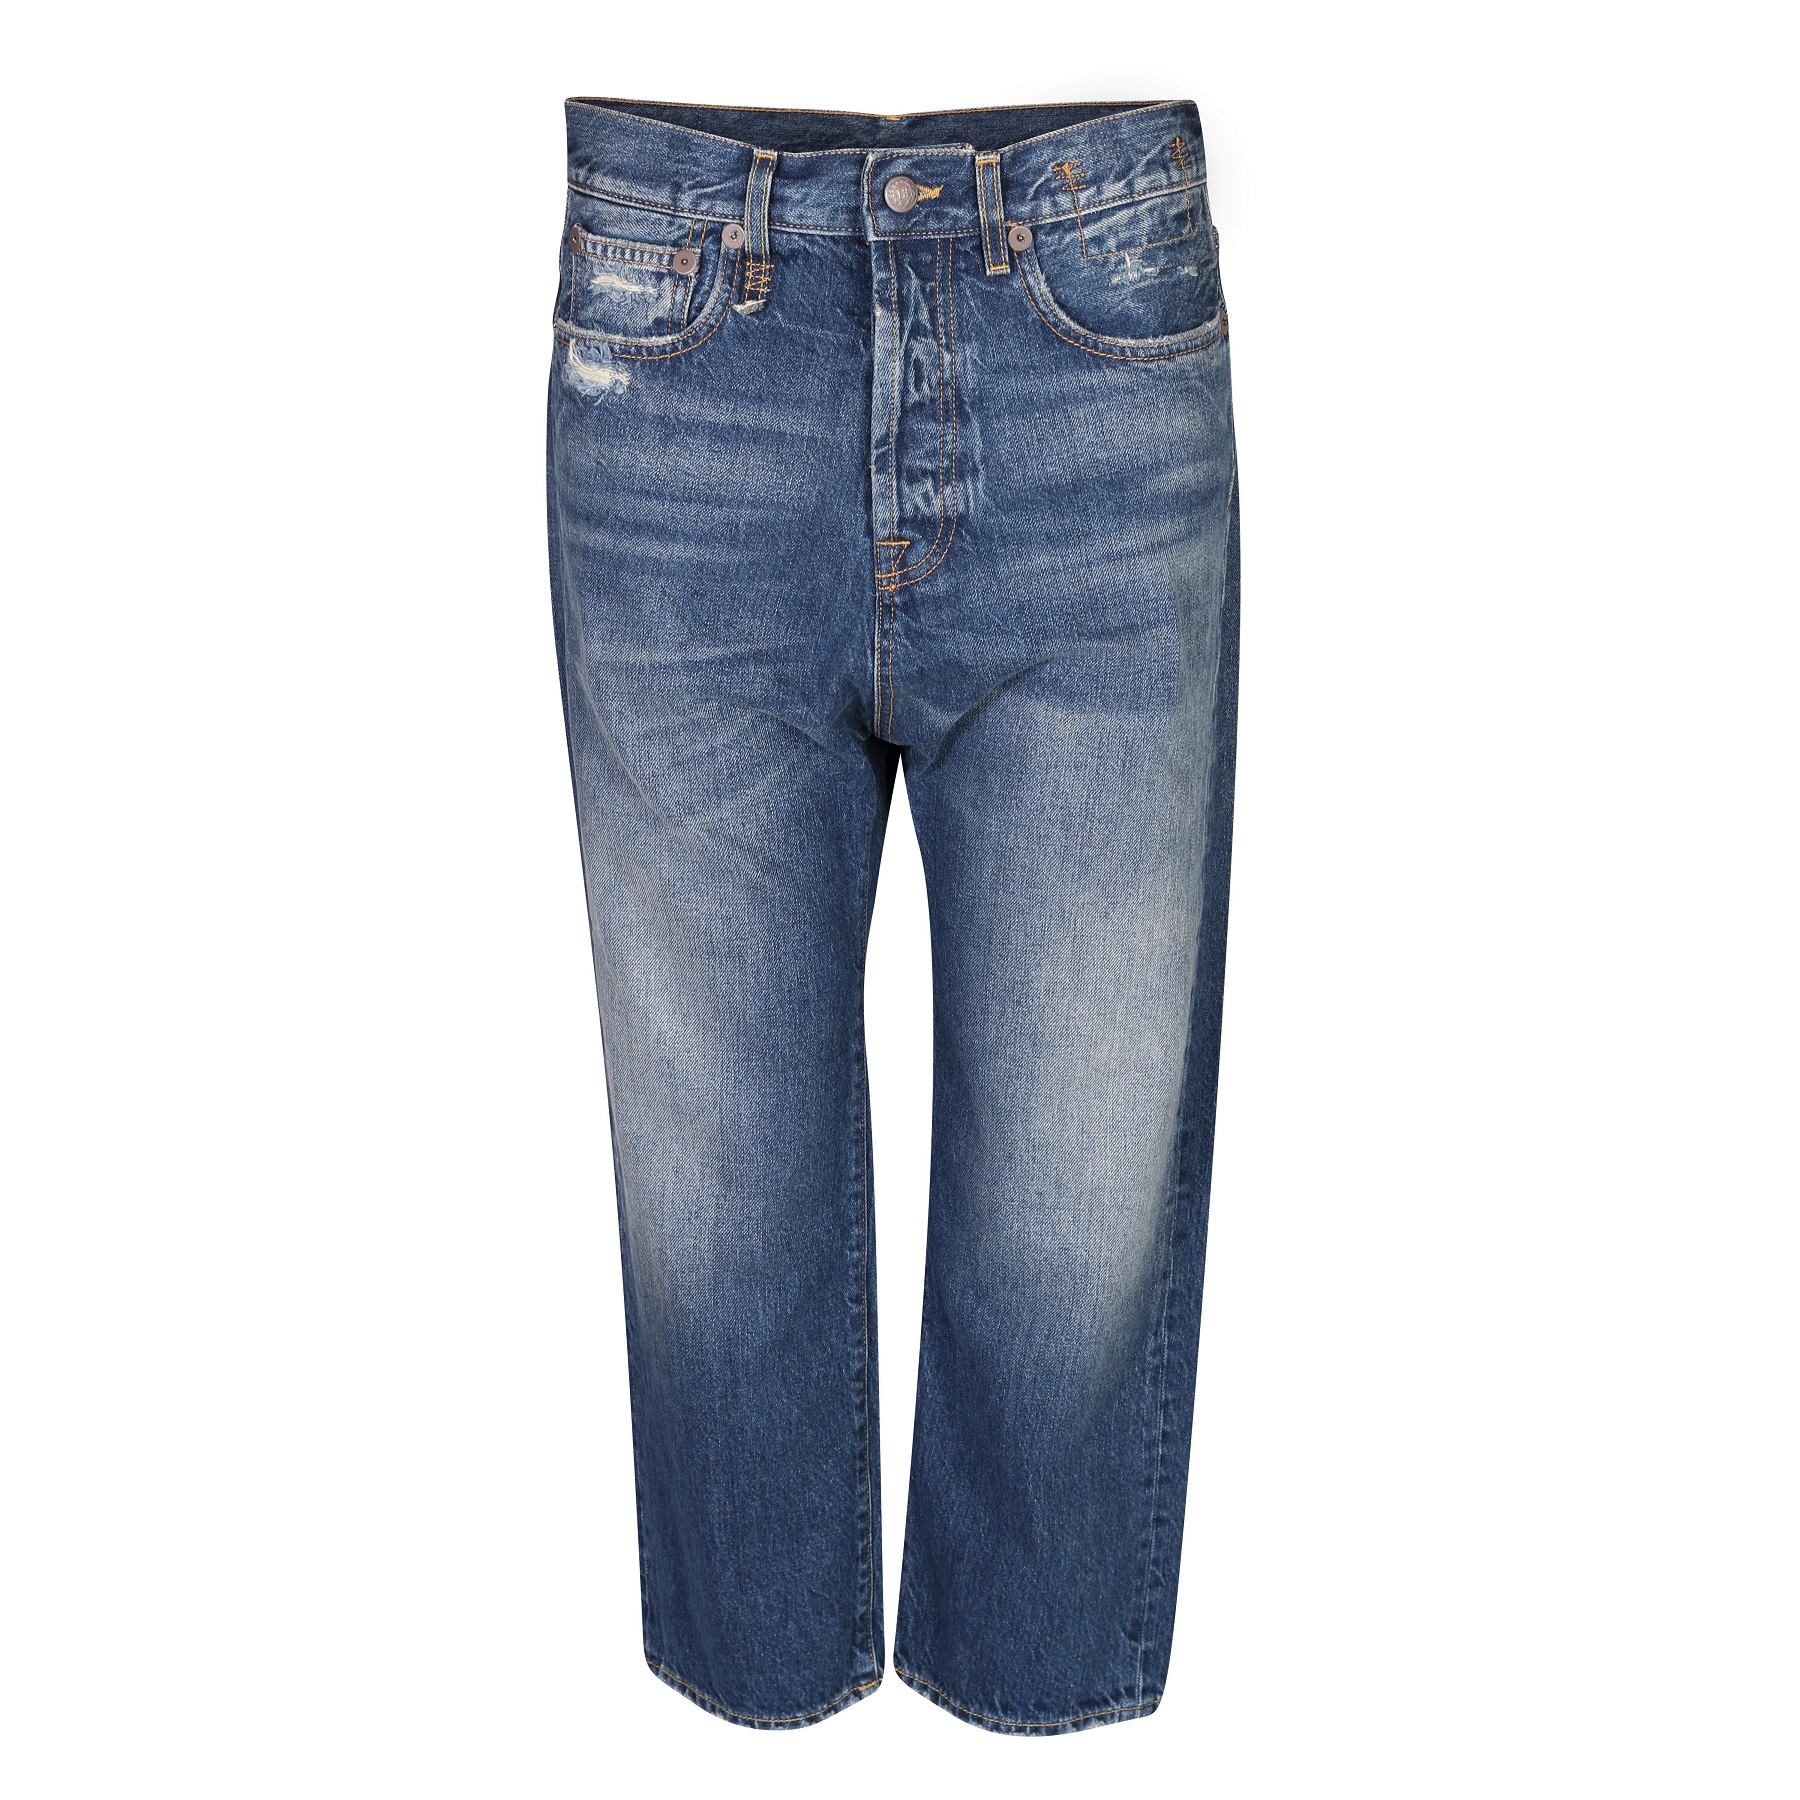 R13 Tailored Drop Jeans in Kyle Washing 27